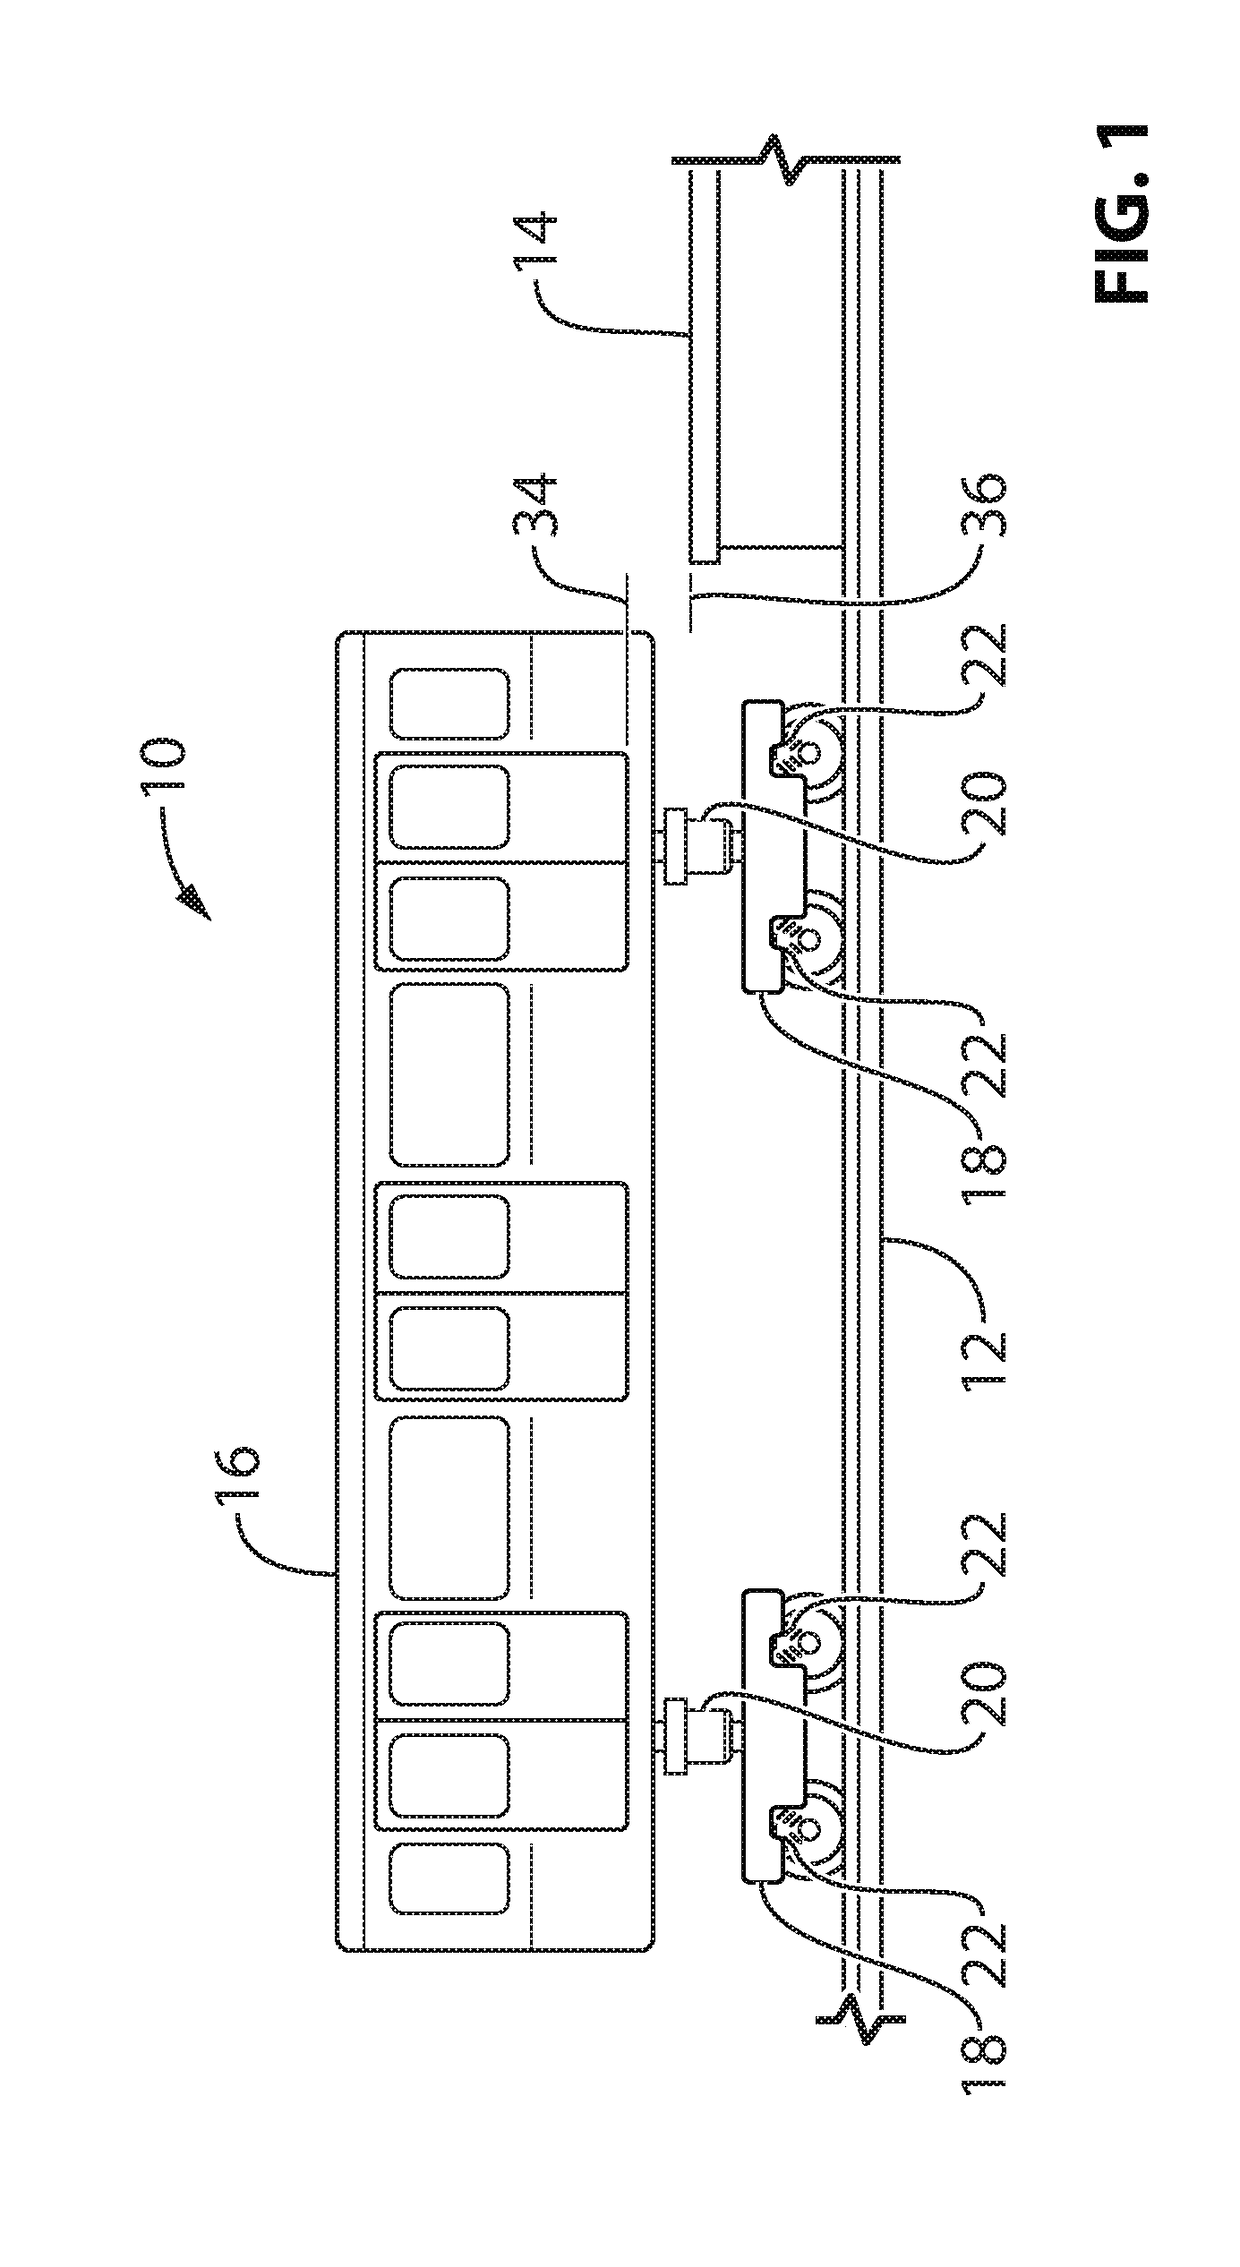 Height adjustable secondary suspension for a rail vehicle